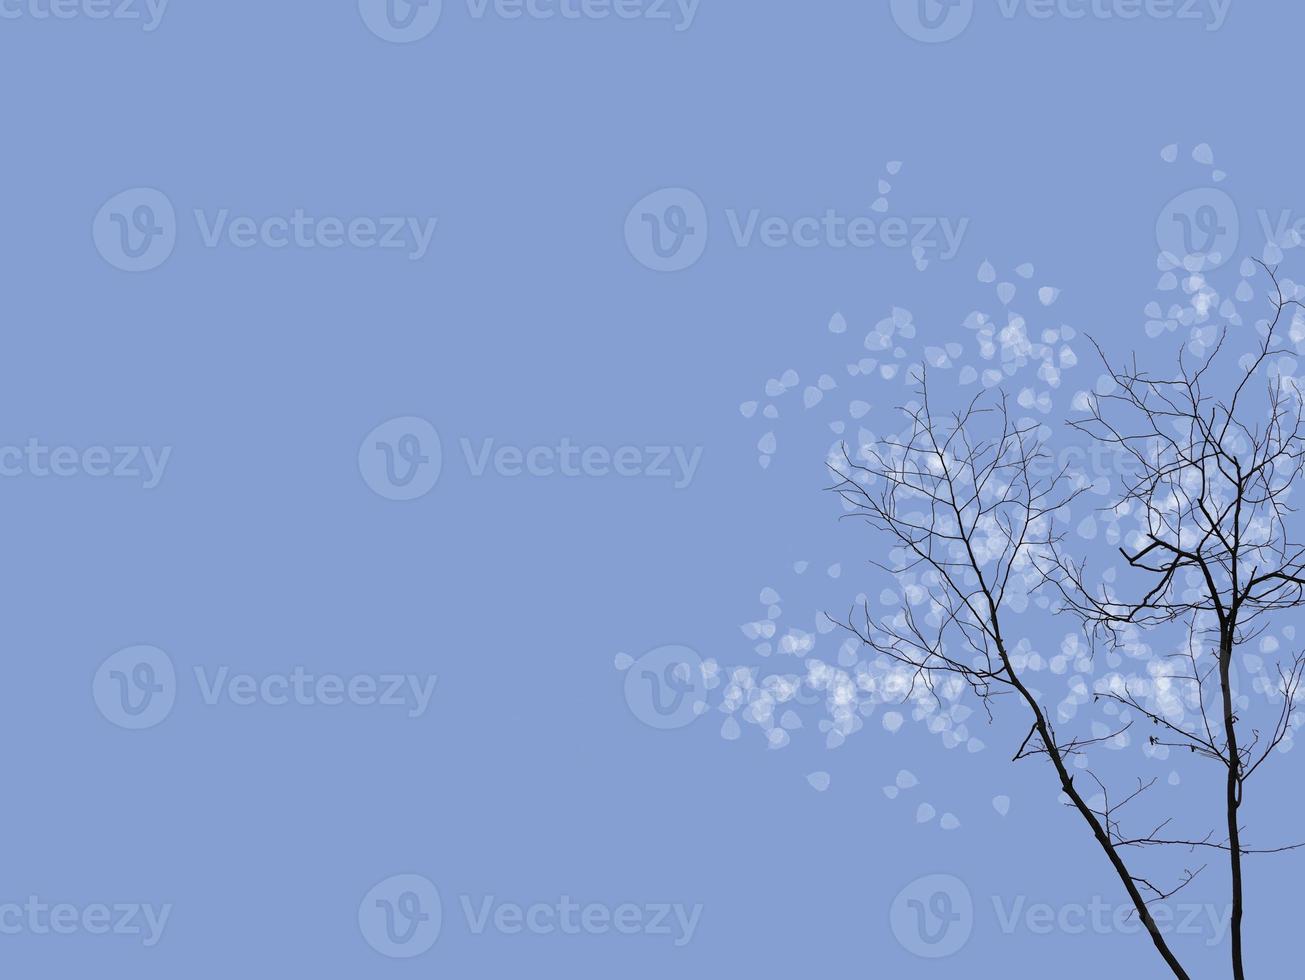 Silhouette dry twigs of tree with transparent white tone leaves blowing, blue color background with blank copy space for text, wallpaper photo